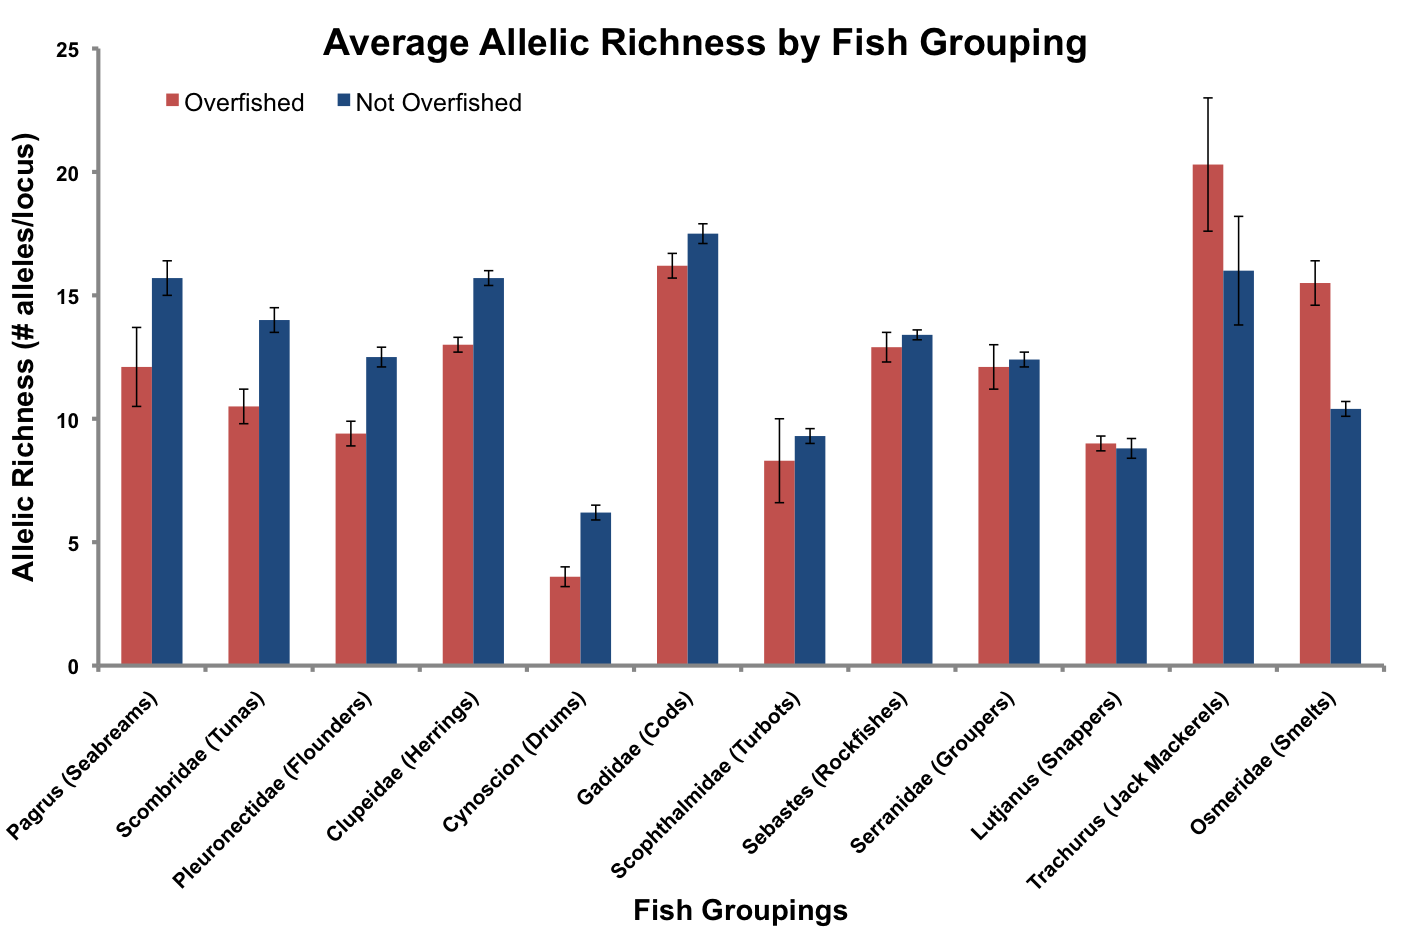 The average allelic richness, with standard error, for overfished and not overfished fish populations within each of the twelve fish groupings analyzed.